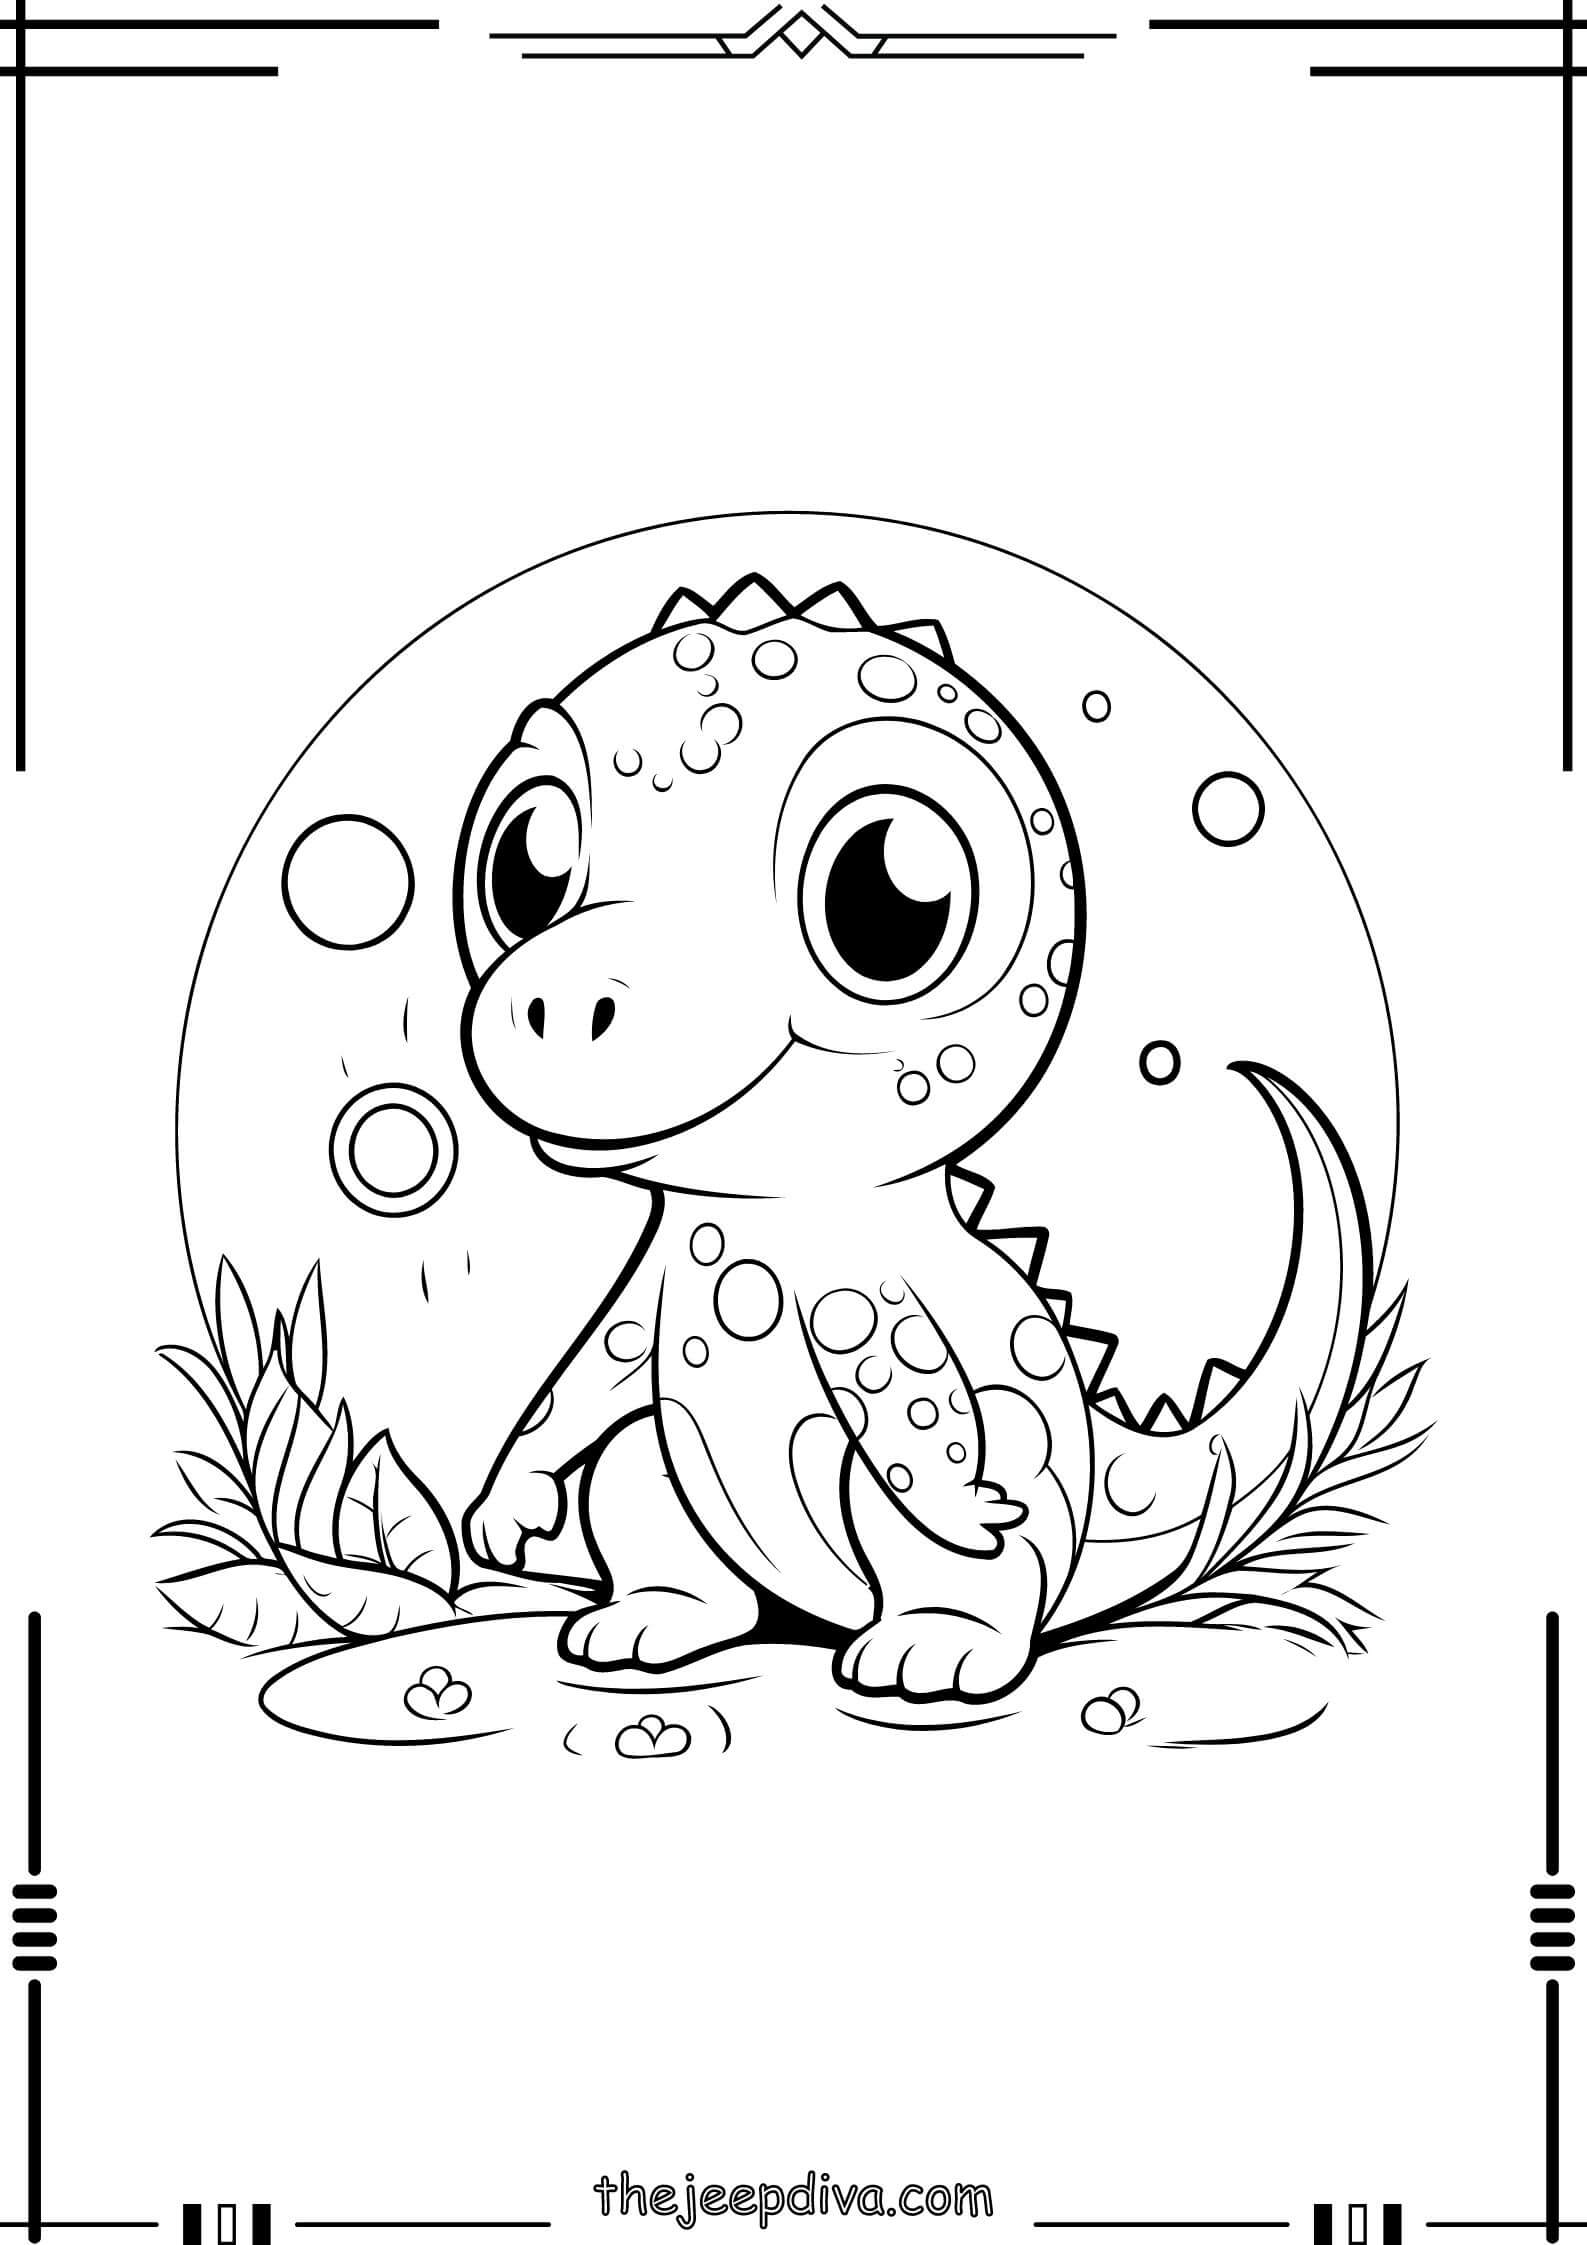 Dinosaur-Colouring-Pages-Easy-17